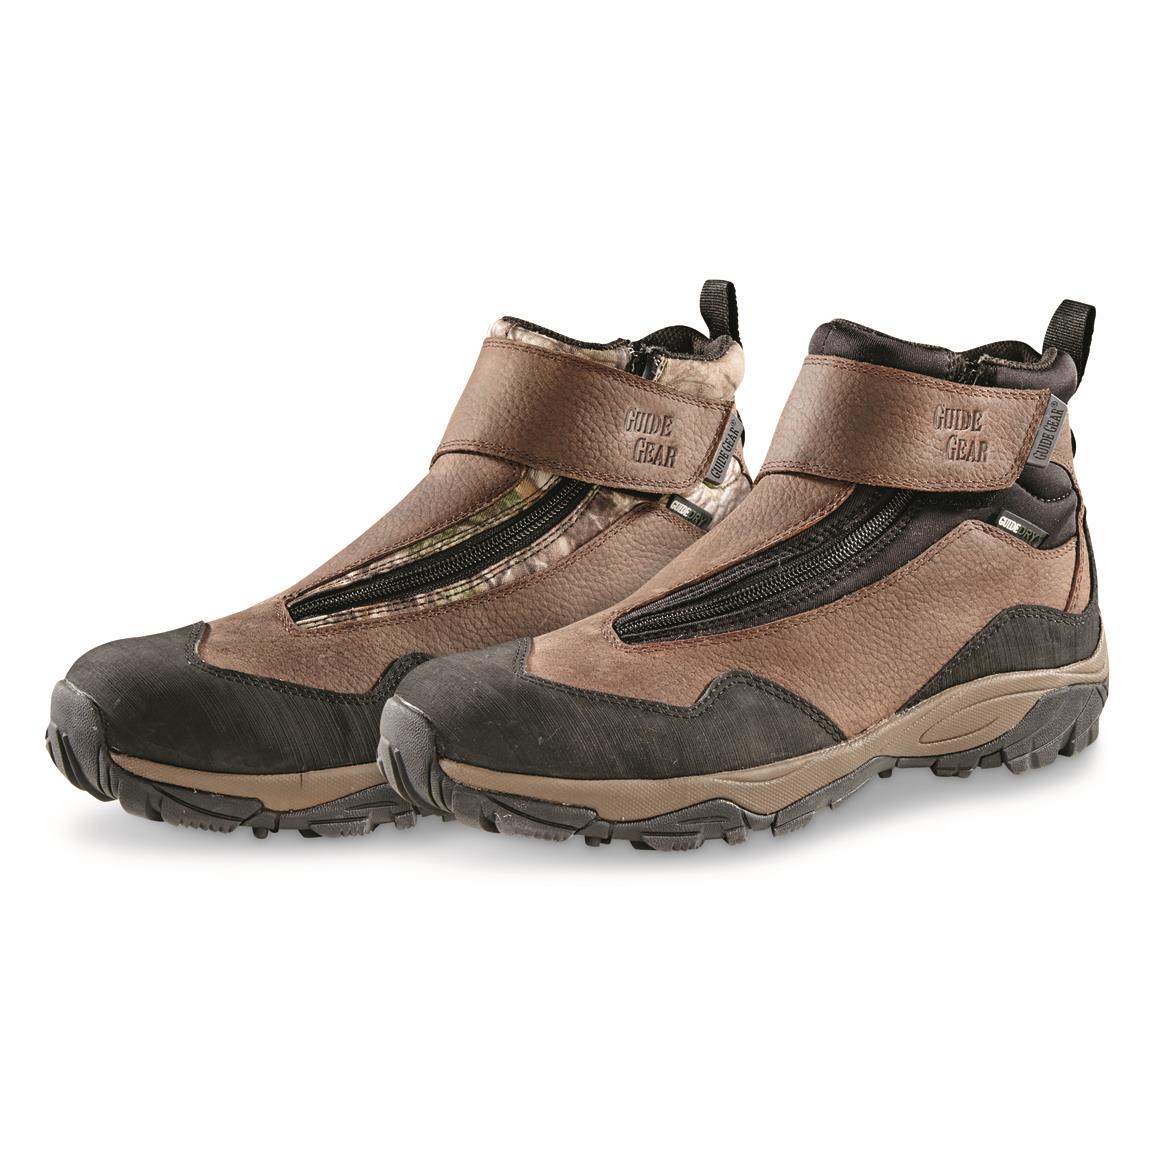 mens zip up hunting boots